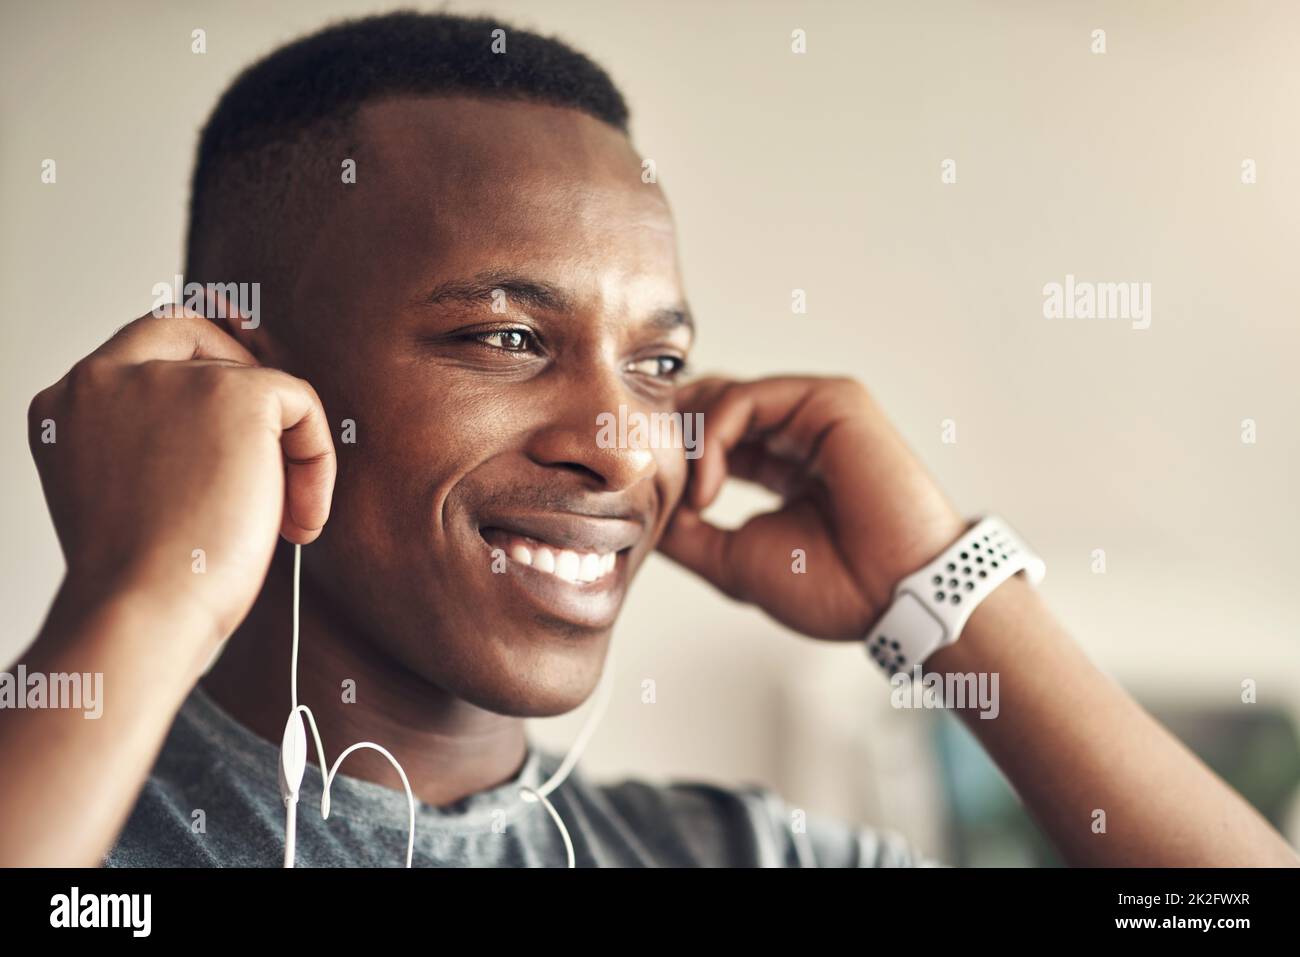 The right tunes keep me pumped with energy. Shot of a sporty young man listening to music while exercising at home. Stock Photo